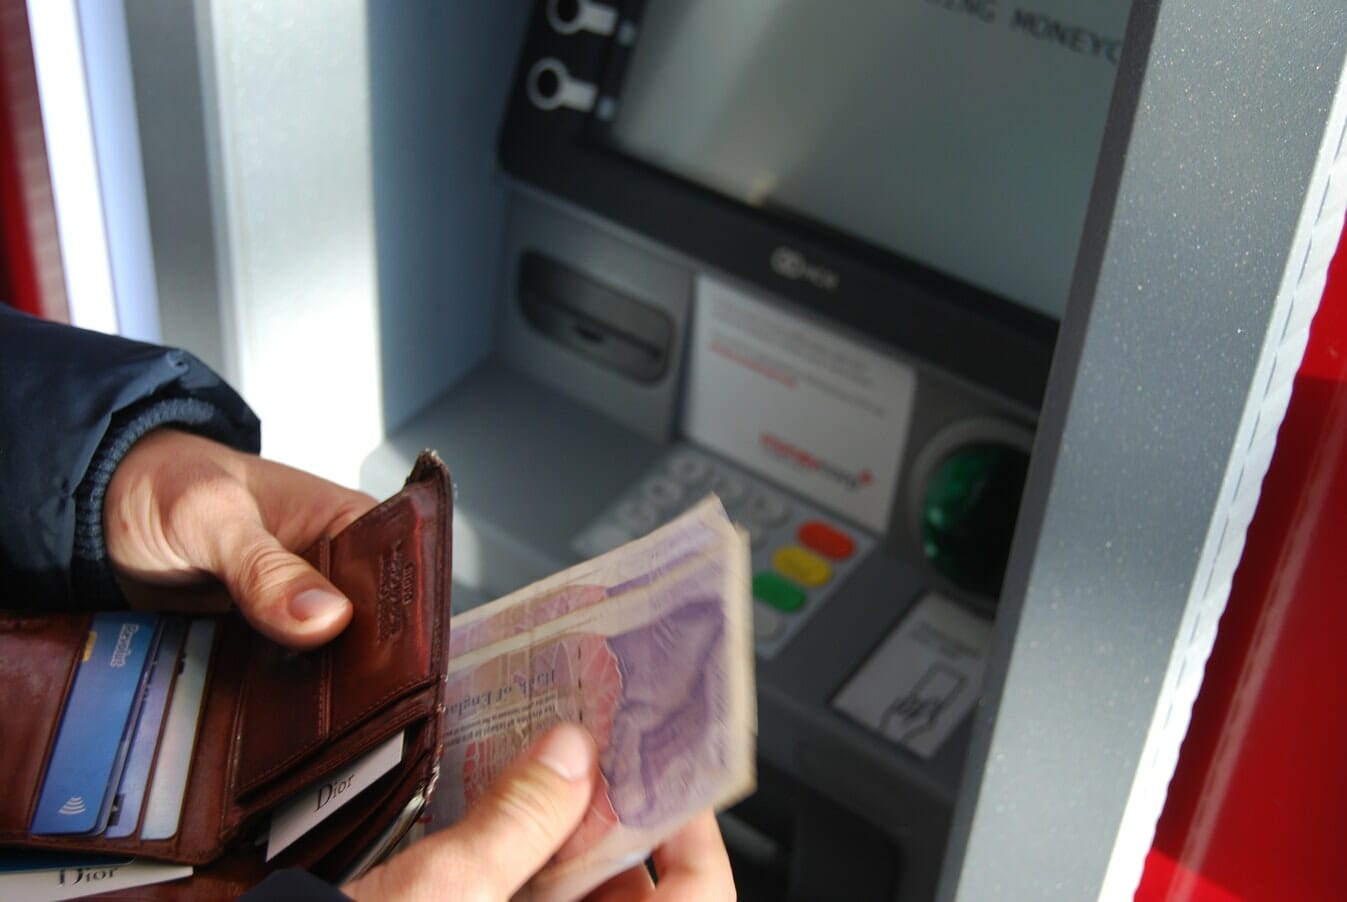 A person is holding a wallet and money in an atm machine.